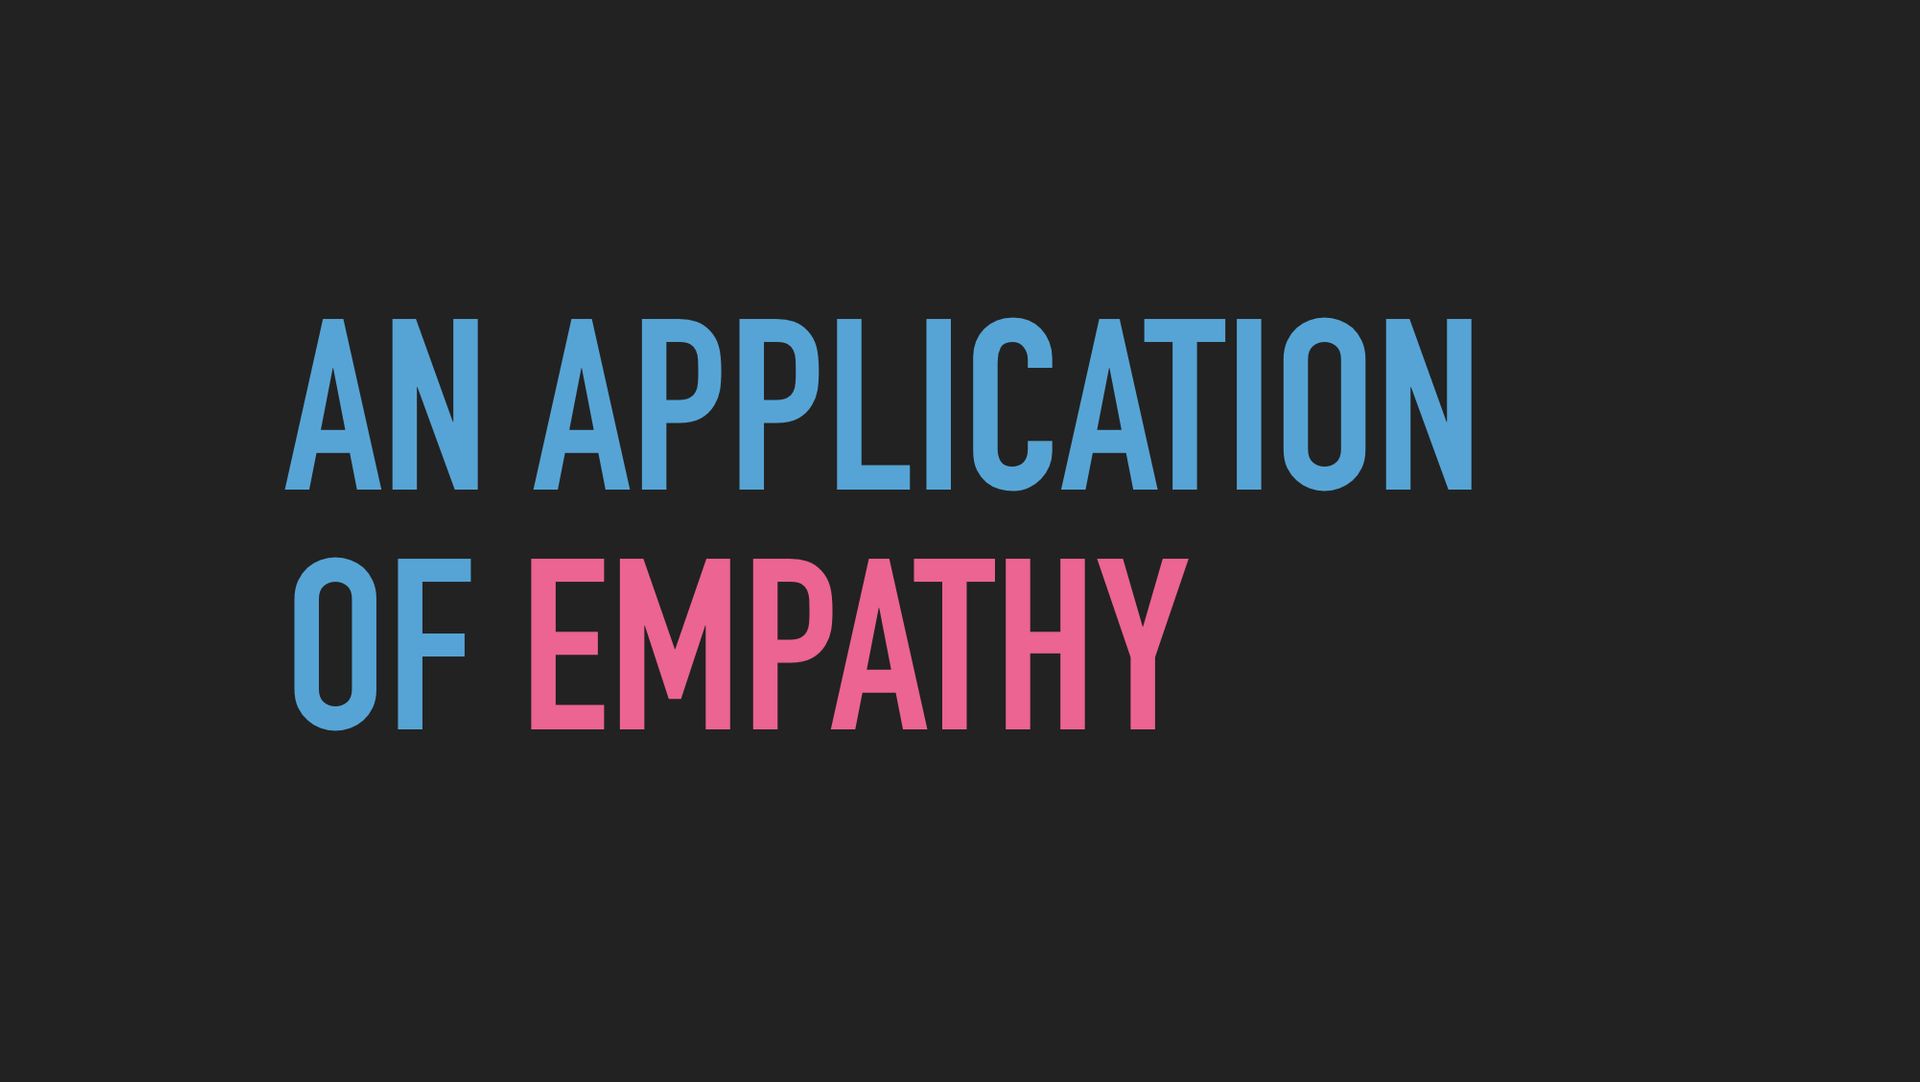 Slide text: An application of empathy.